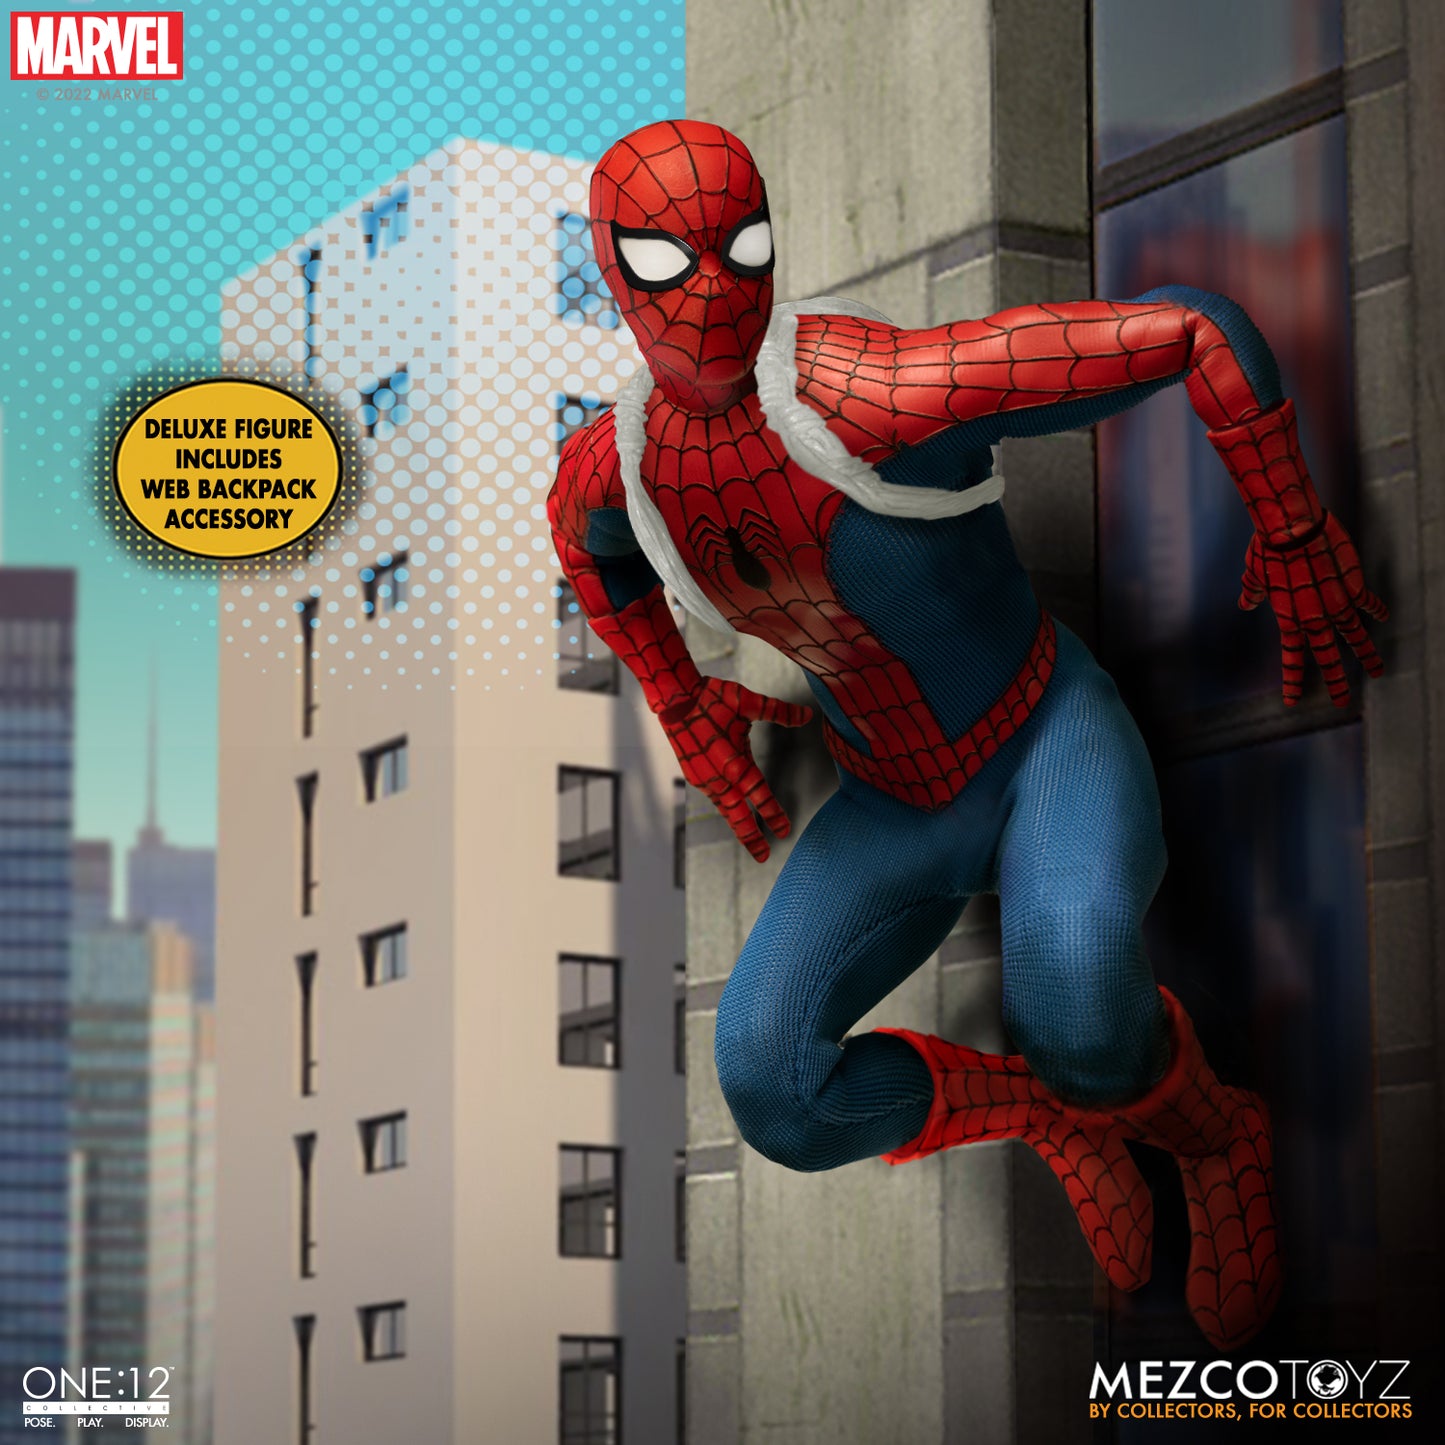 One:12 Collective Amazing Spider-Man Deluxe action figure